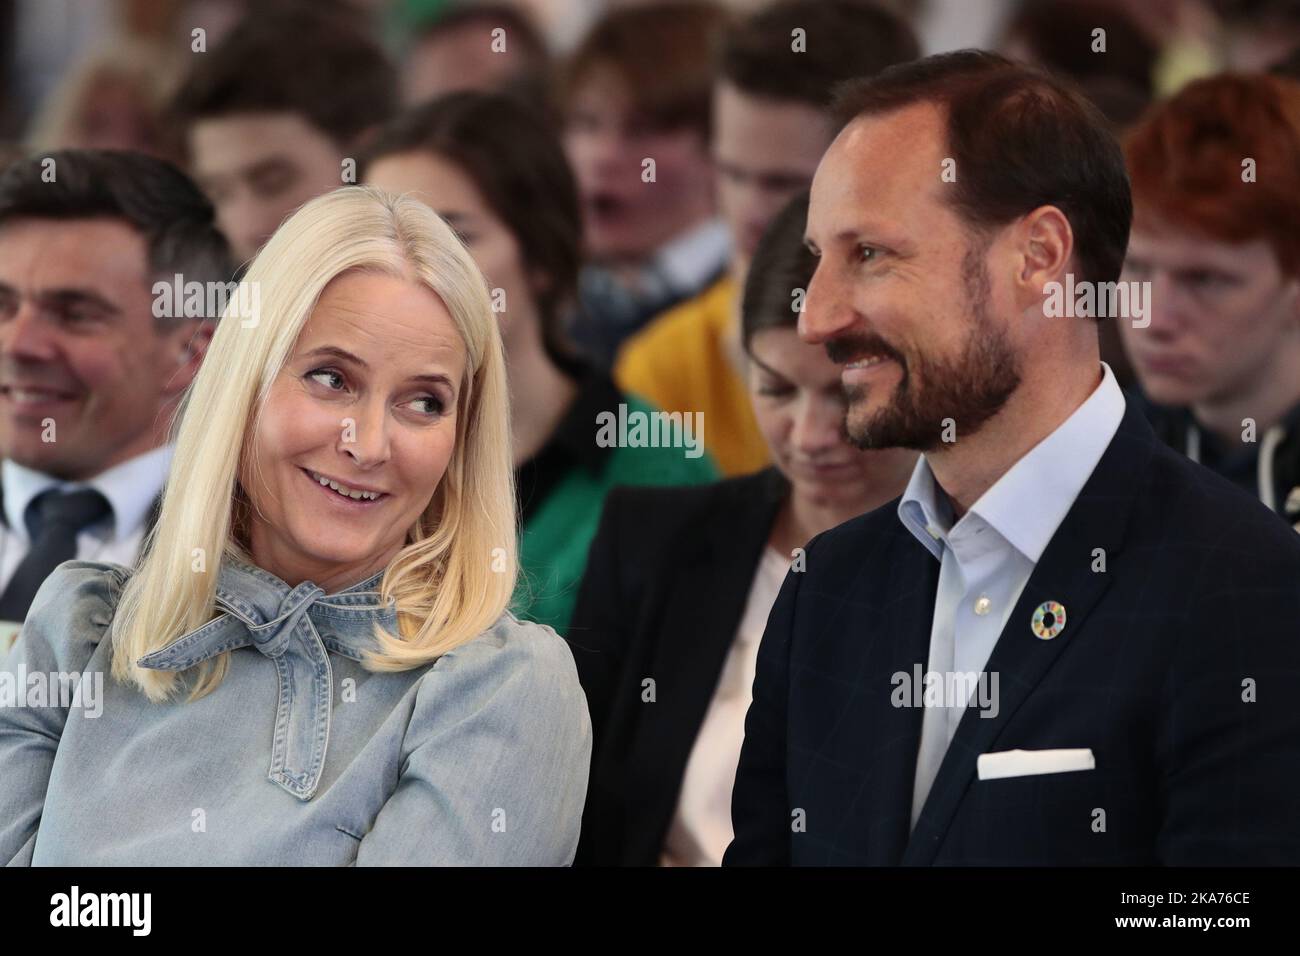 Oslo, Norway 20190508. Crown Princess Mette-Marit starts the literary metro ride at Kolsaas Wednesday. The trip goes on to Bekkestua, Roea and Majorstuen. Crown Prince Haakon accompanies her. They are stopping for events at libraries along the line. Photo: Lise Aaserud / NTB scanpix Stock Photo